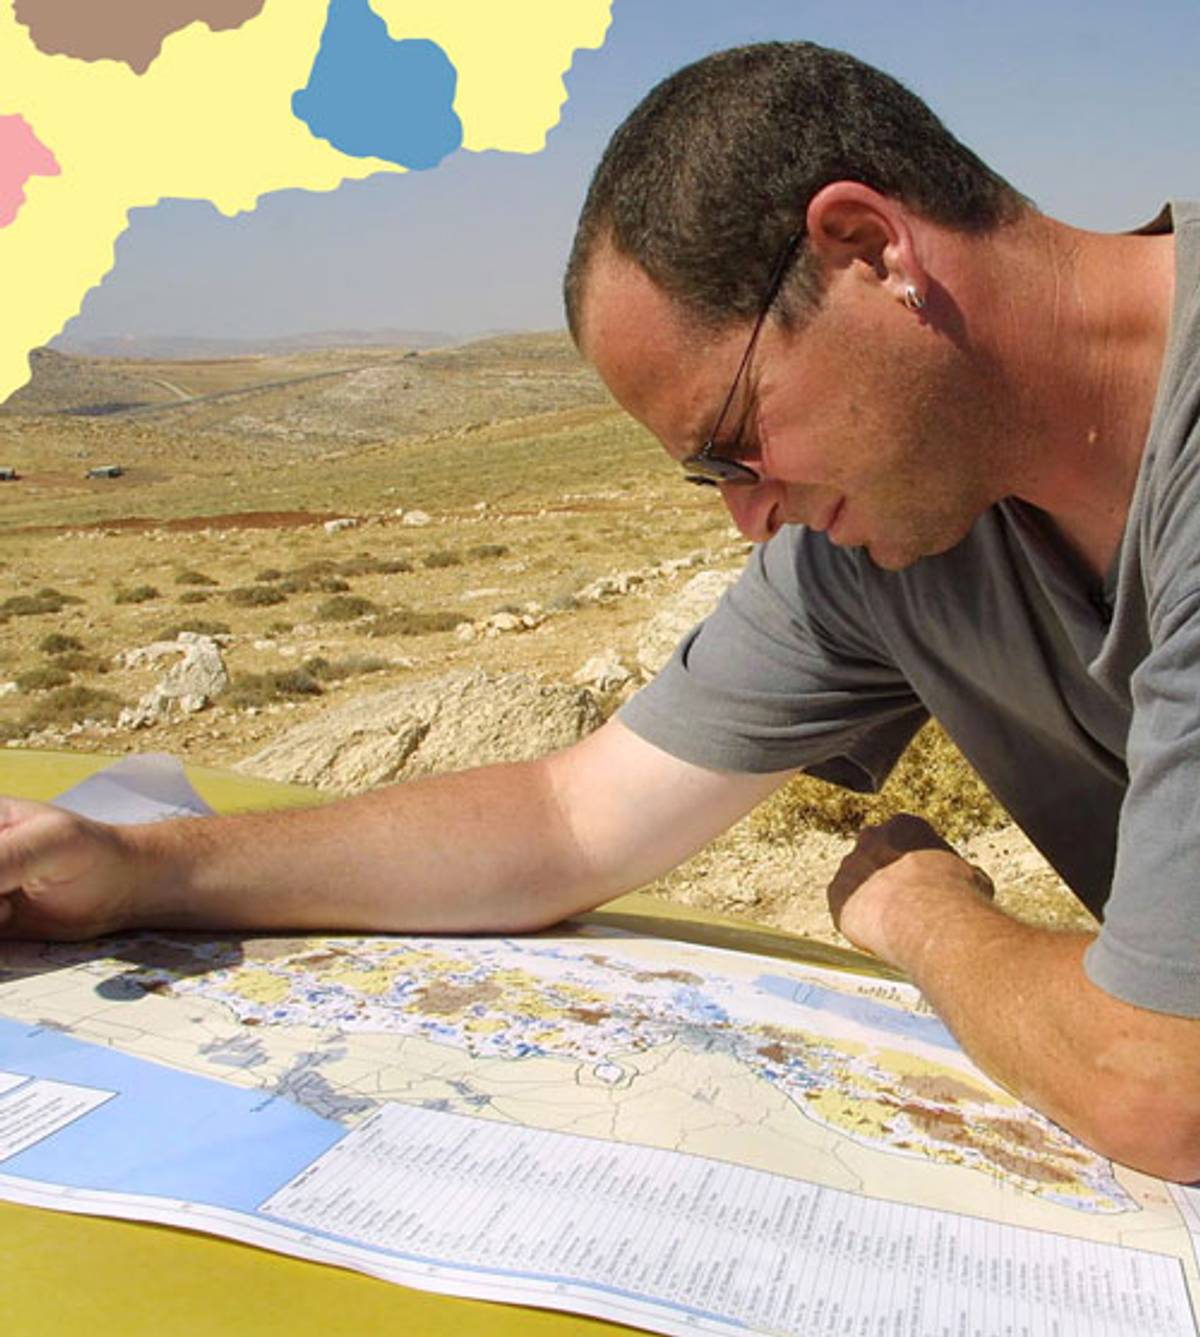 Dror Etkes, head of the Peace Now Settlement Watch team, checks a map as he monitors new illegal outposts in the Kohav Hashachar area in 2003 (Photo: Quique Kierszenbaum/Getty Images)